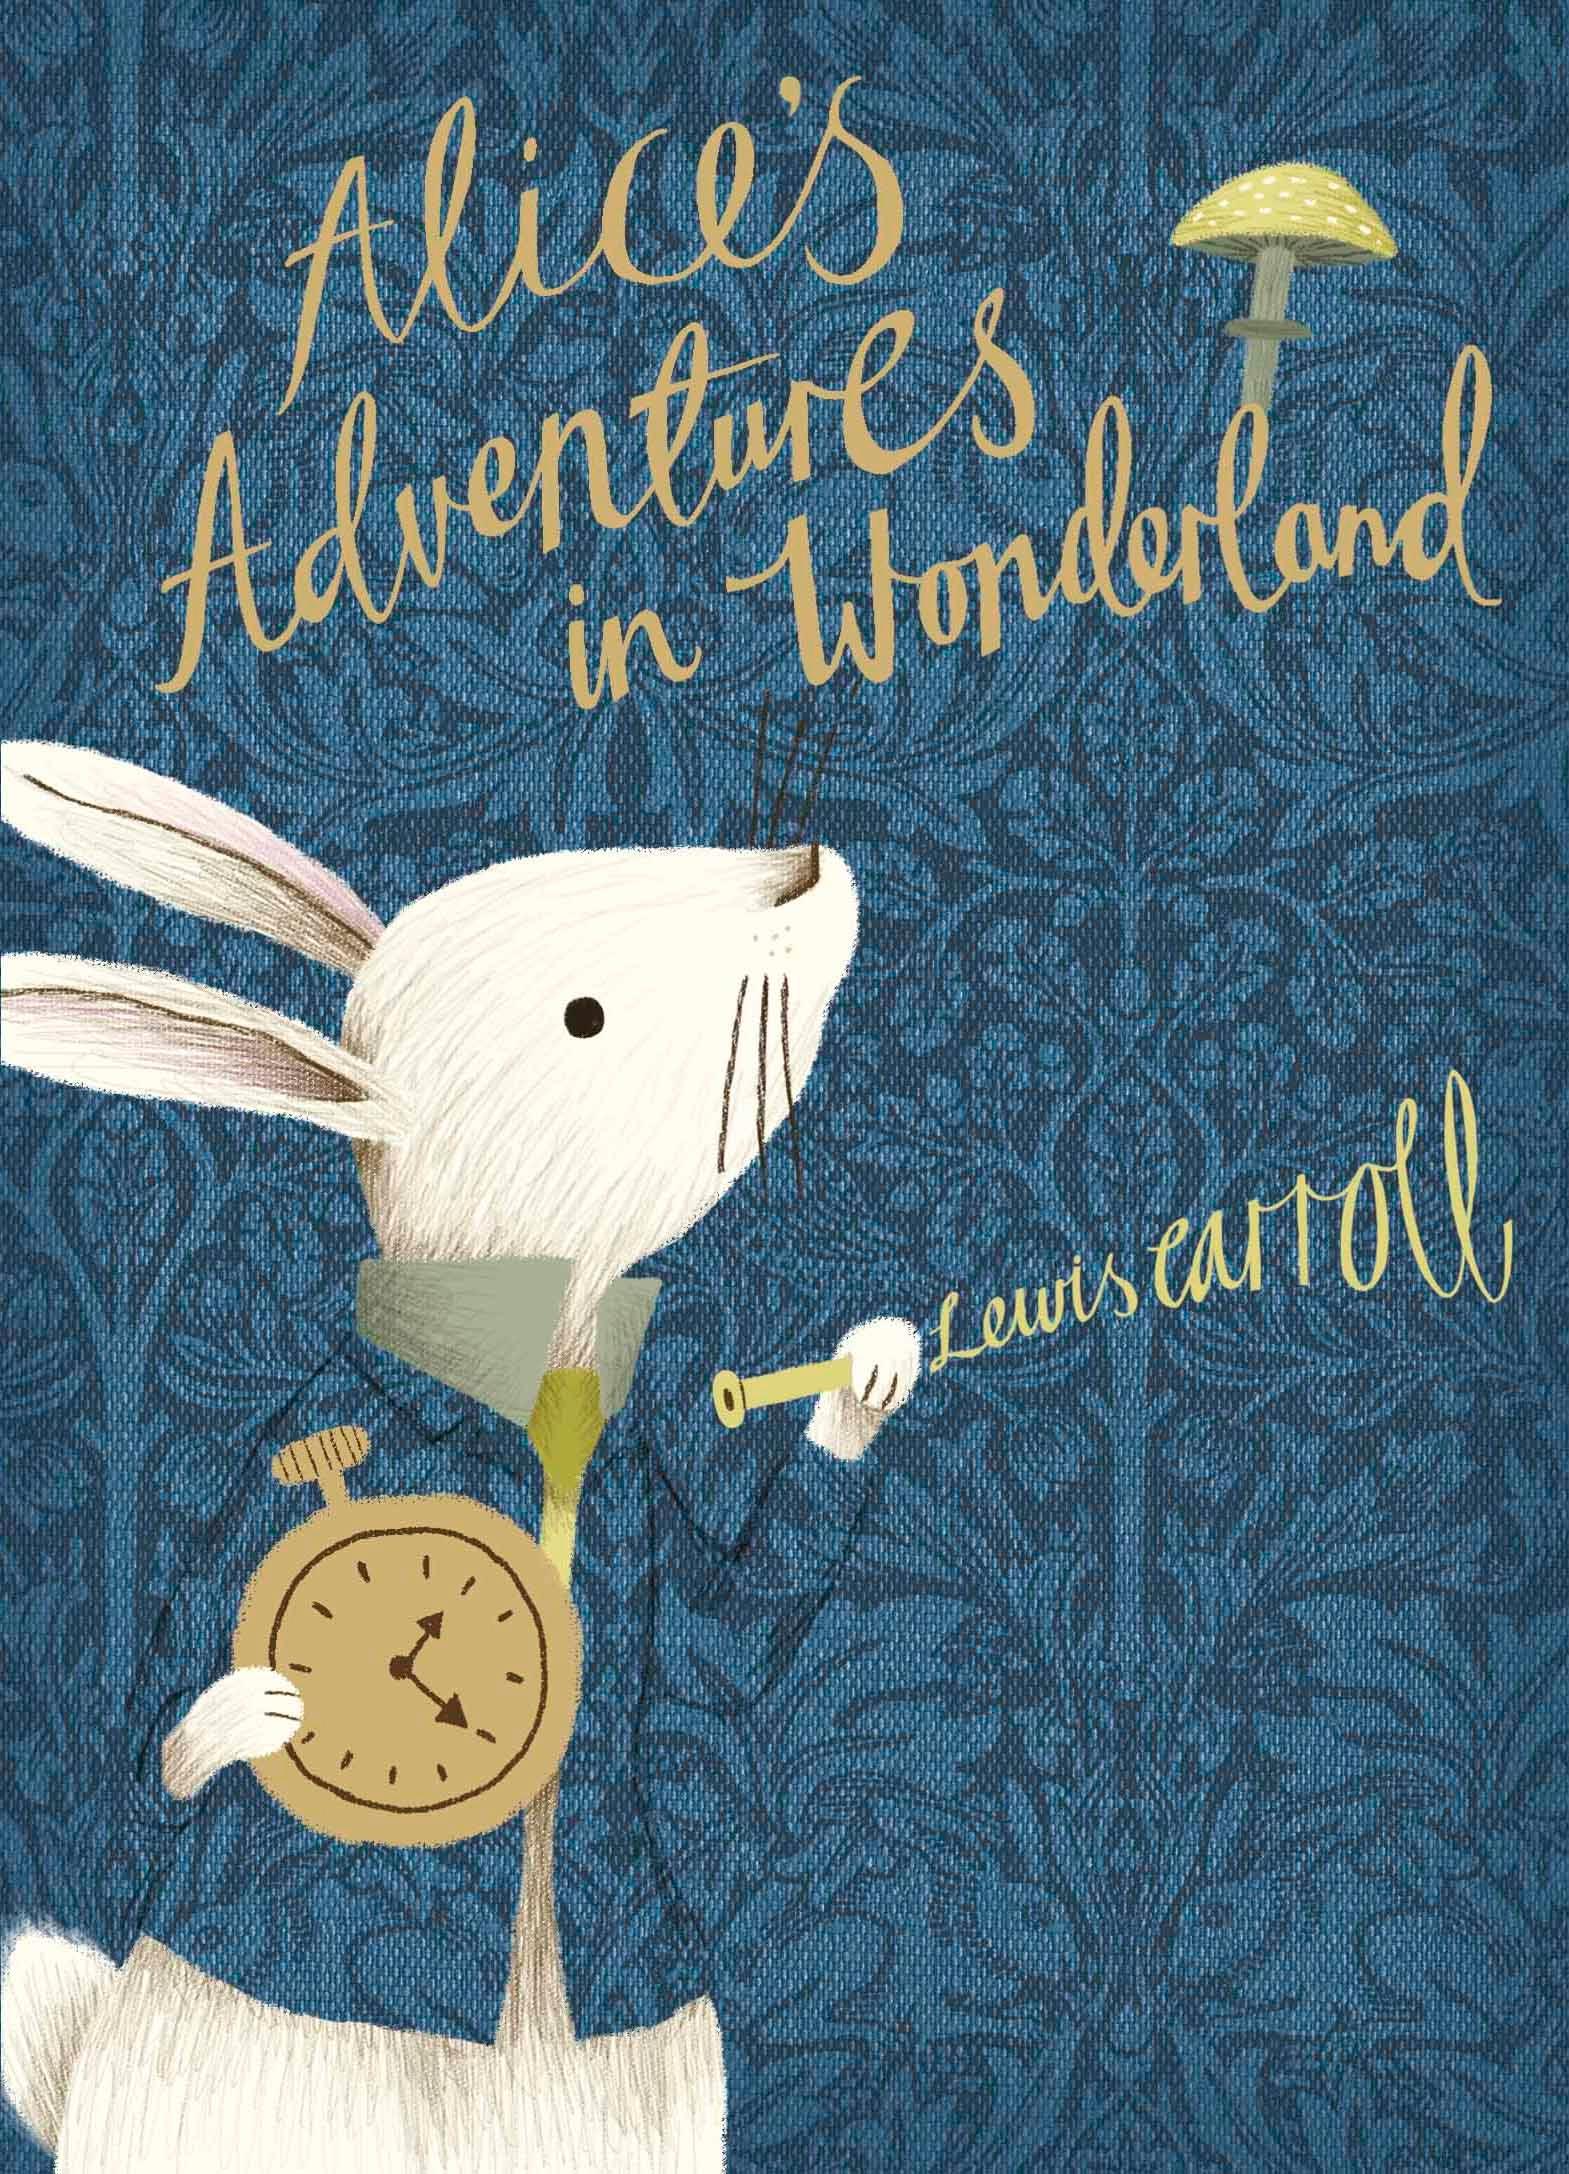 Alice's Adventures in Wonderland. V&A Collector's Edition / Lewis Carroll / Buch / Puffin Classics / 150 S. / Englisch / 2017 / Penguin Books Ltd (UK) / EAN 9780141385655 - Carroll, Lewis